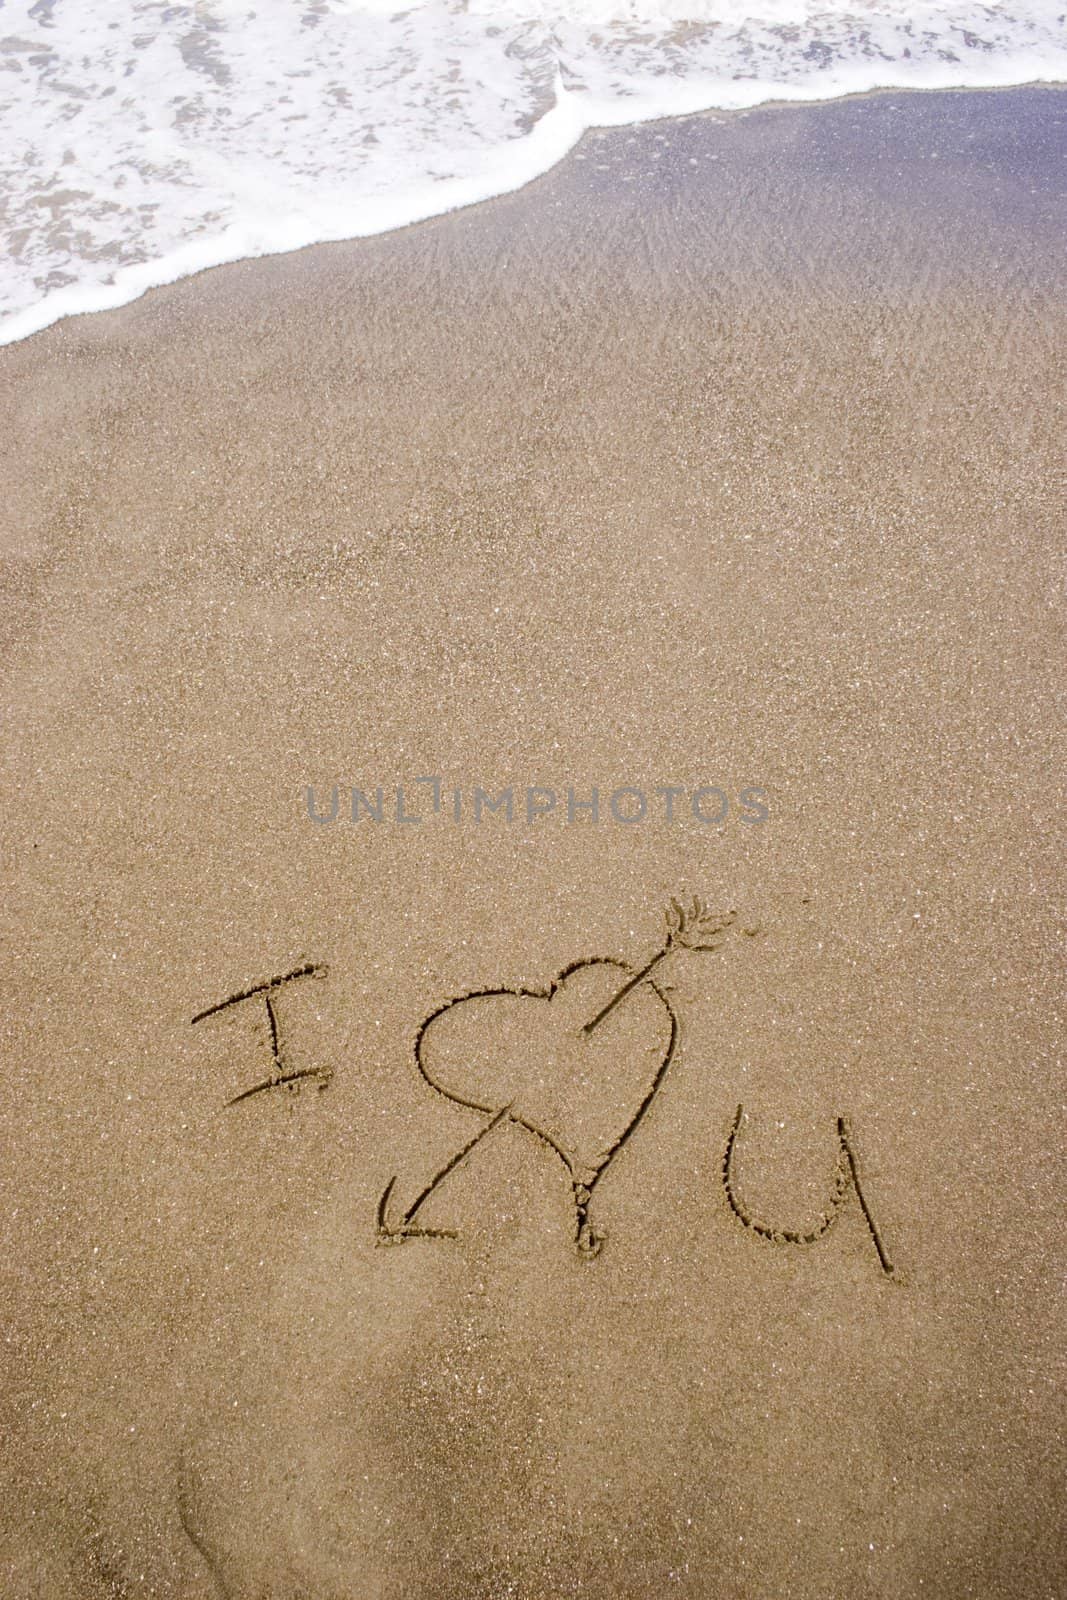 I love you written in the sand.